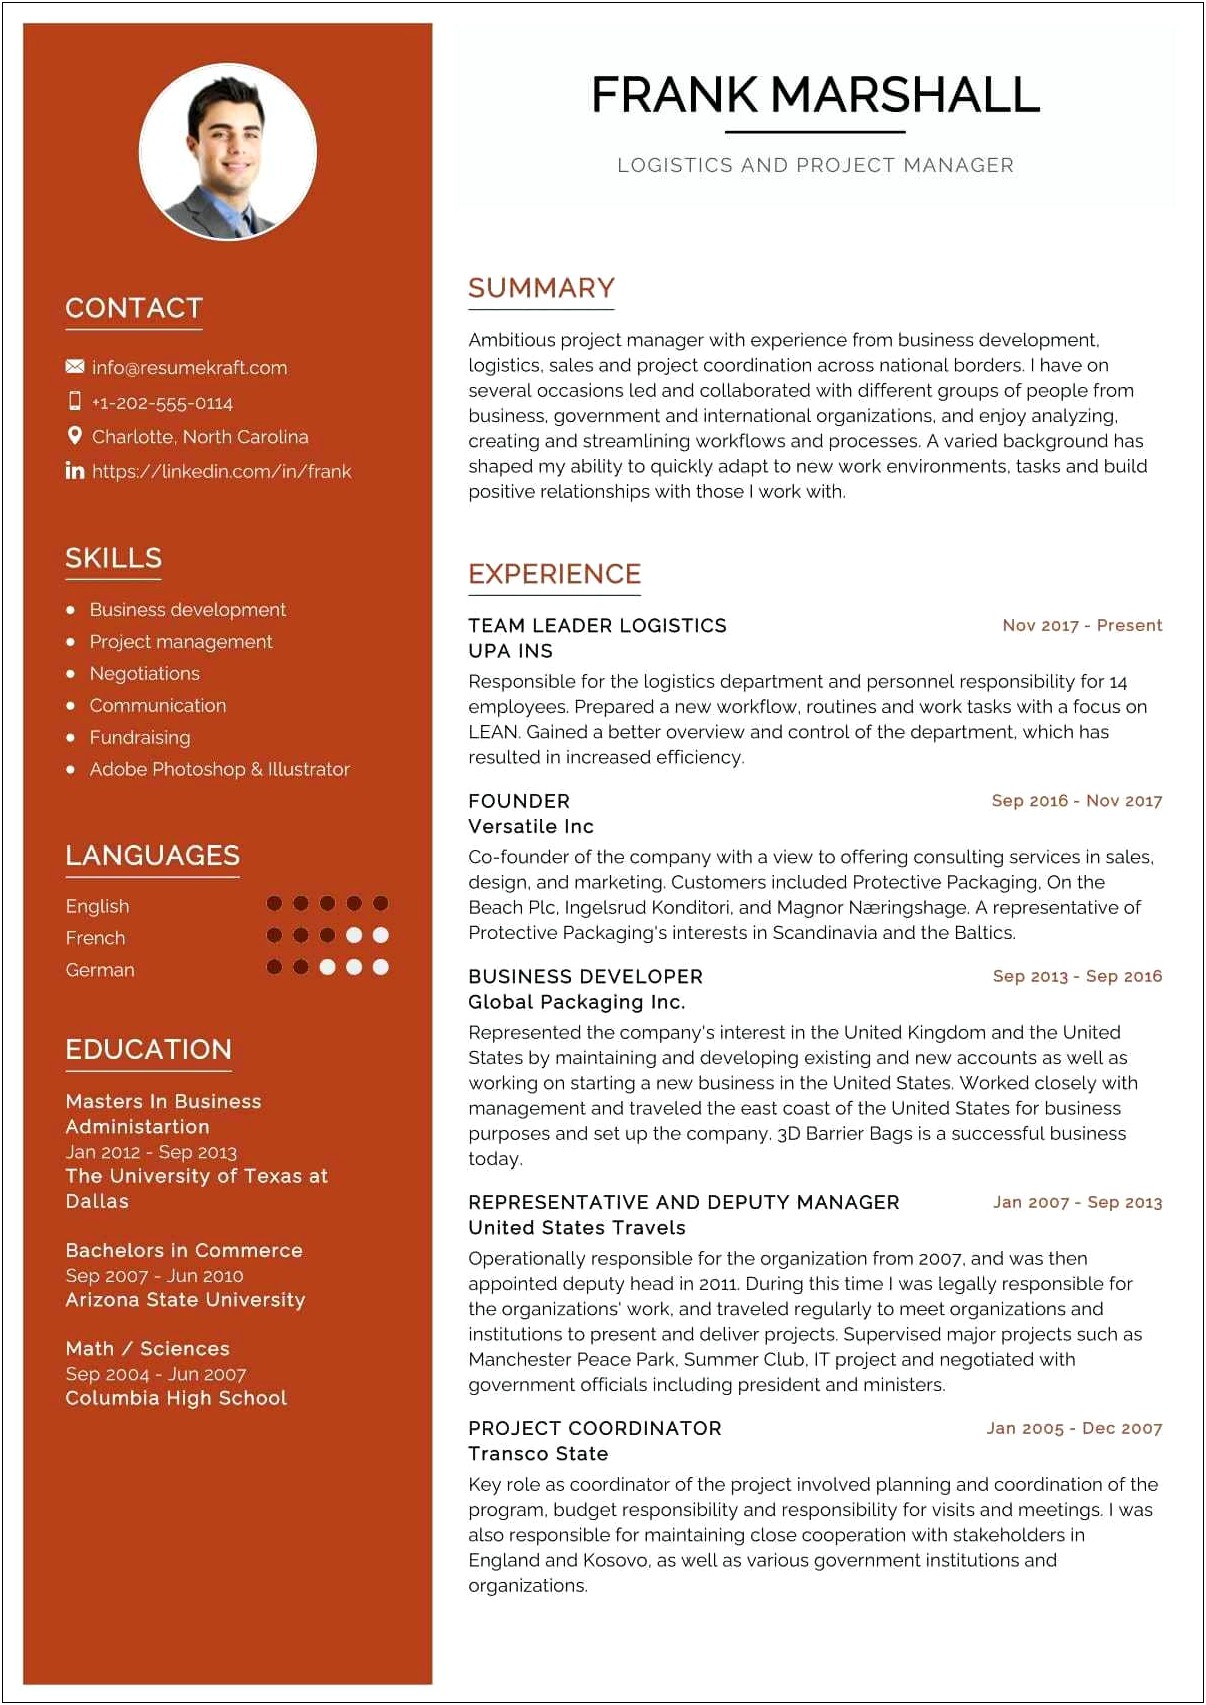 Air Freight Manager Resume Sample